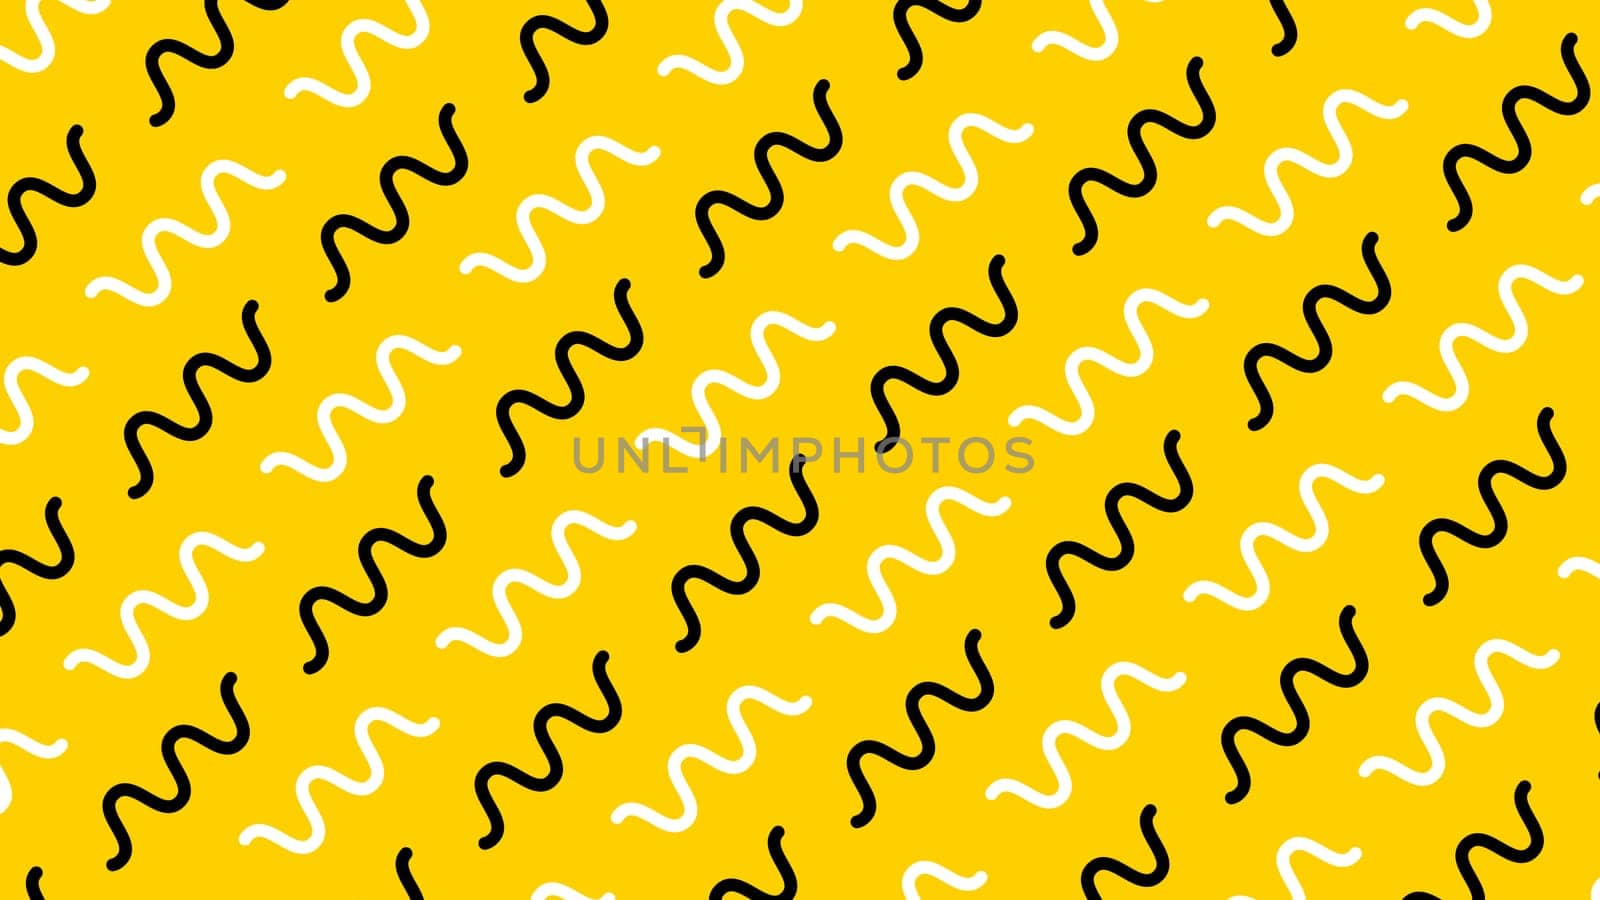 Minimal modern zig zag background. White and black curved line on yellow background. High quality